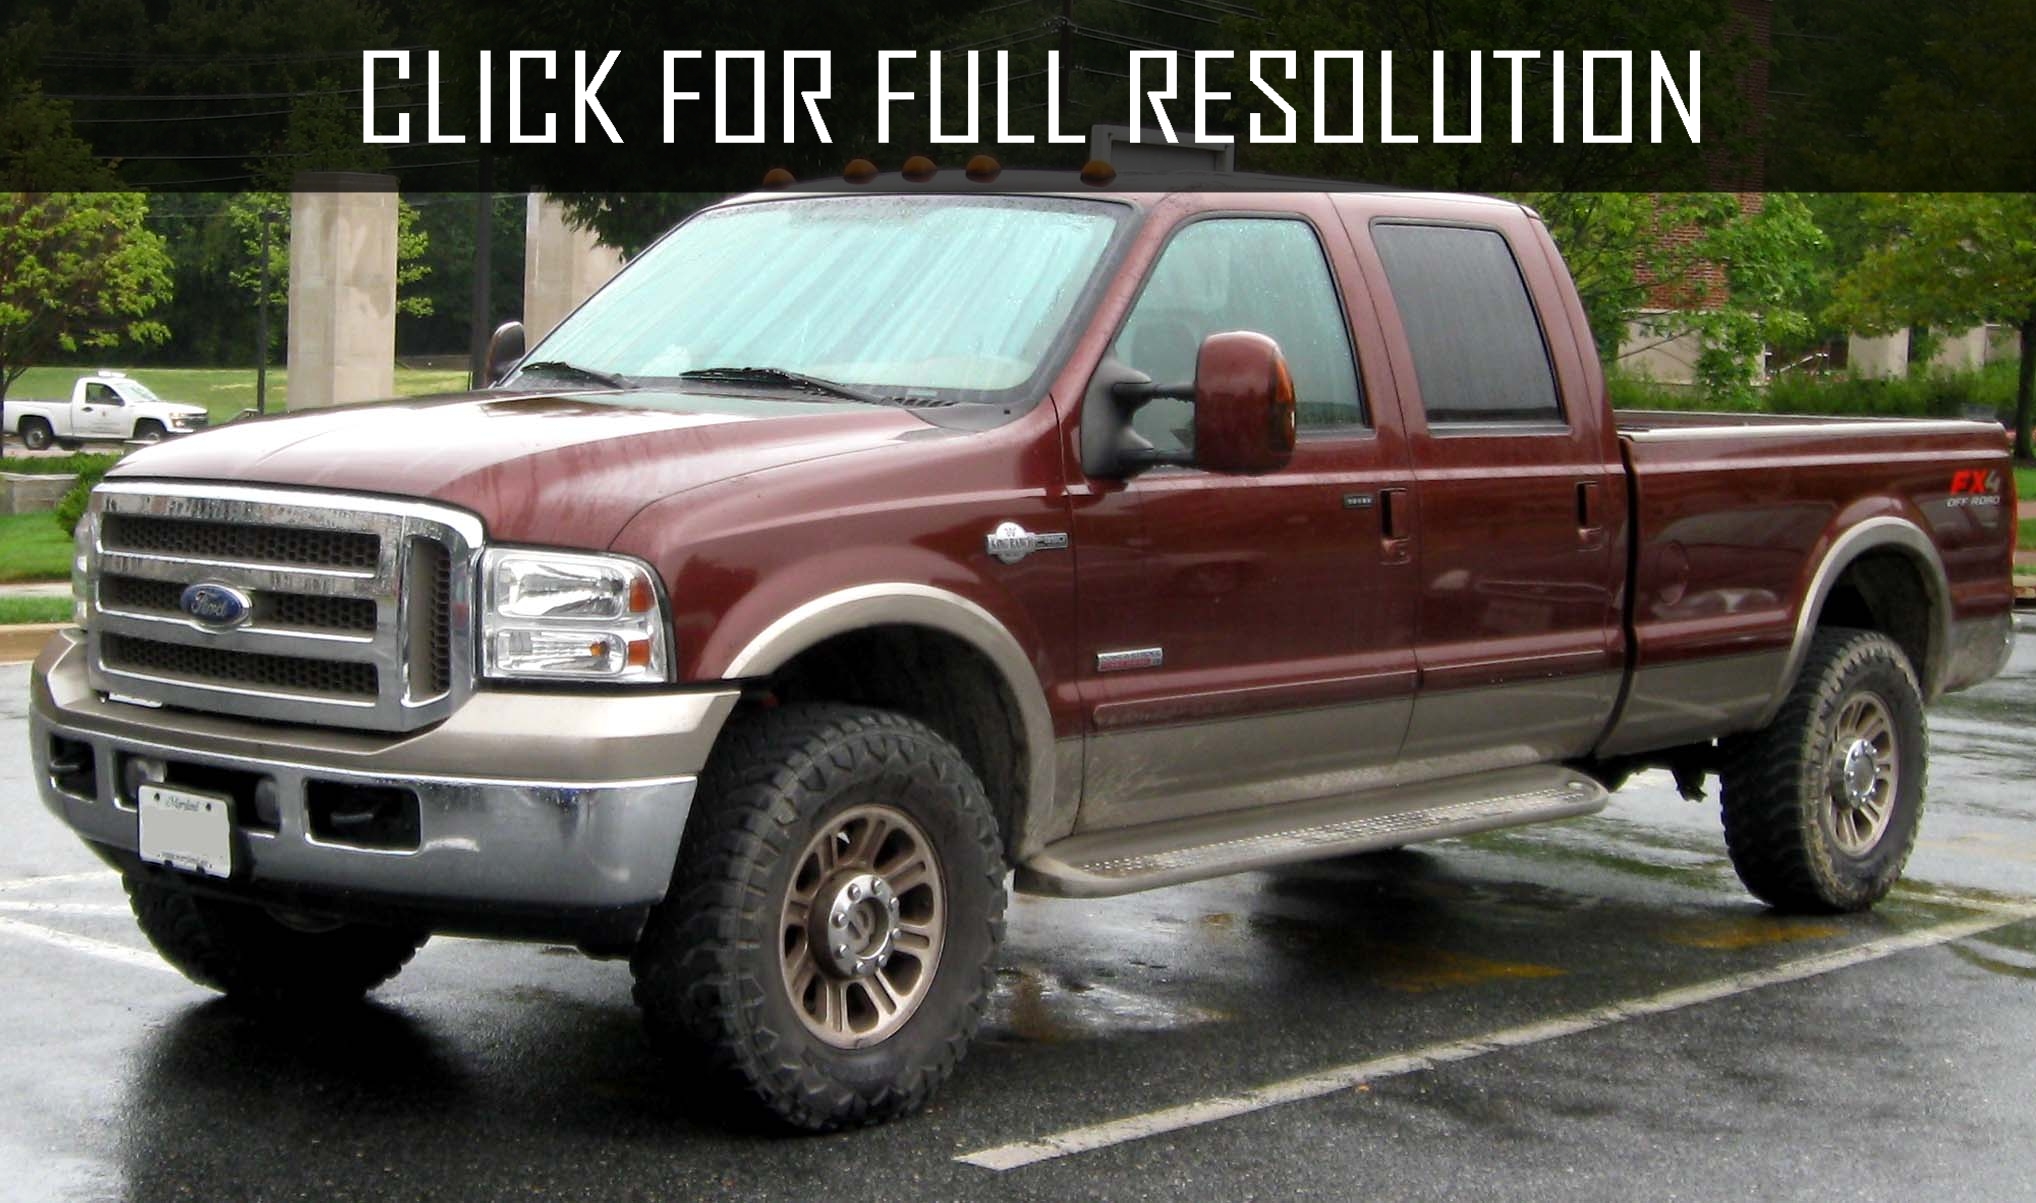 2003 Ford F350 King Ranch